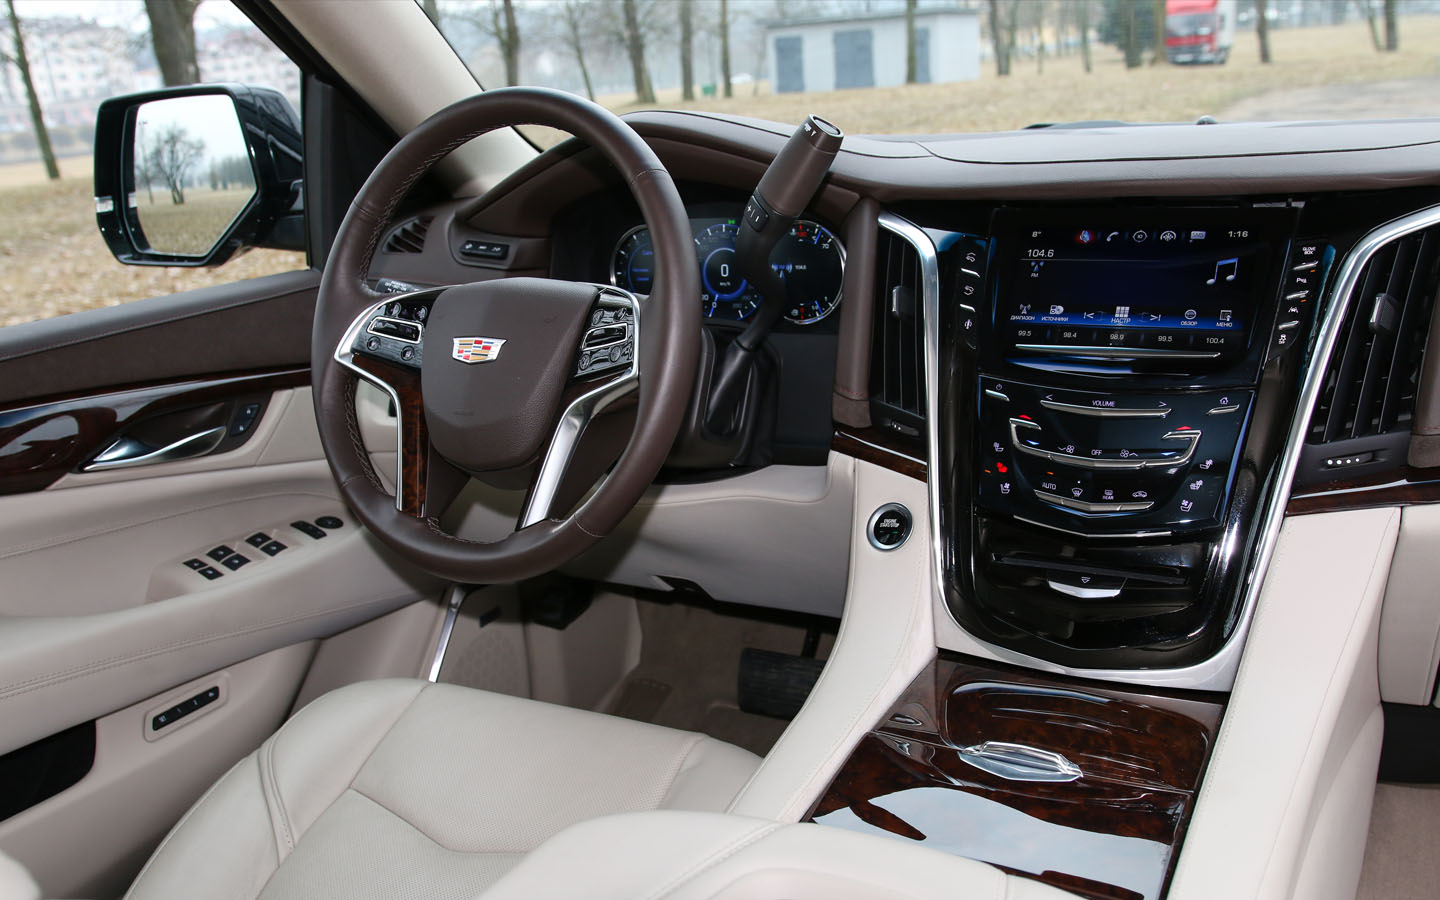 cars with the biggest screens: Chevrolet escalade interior